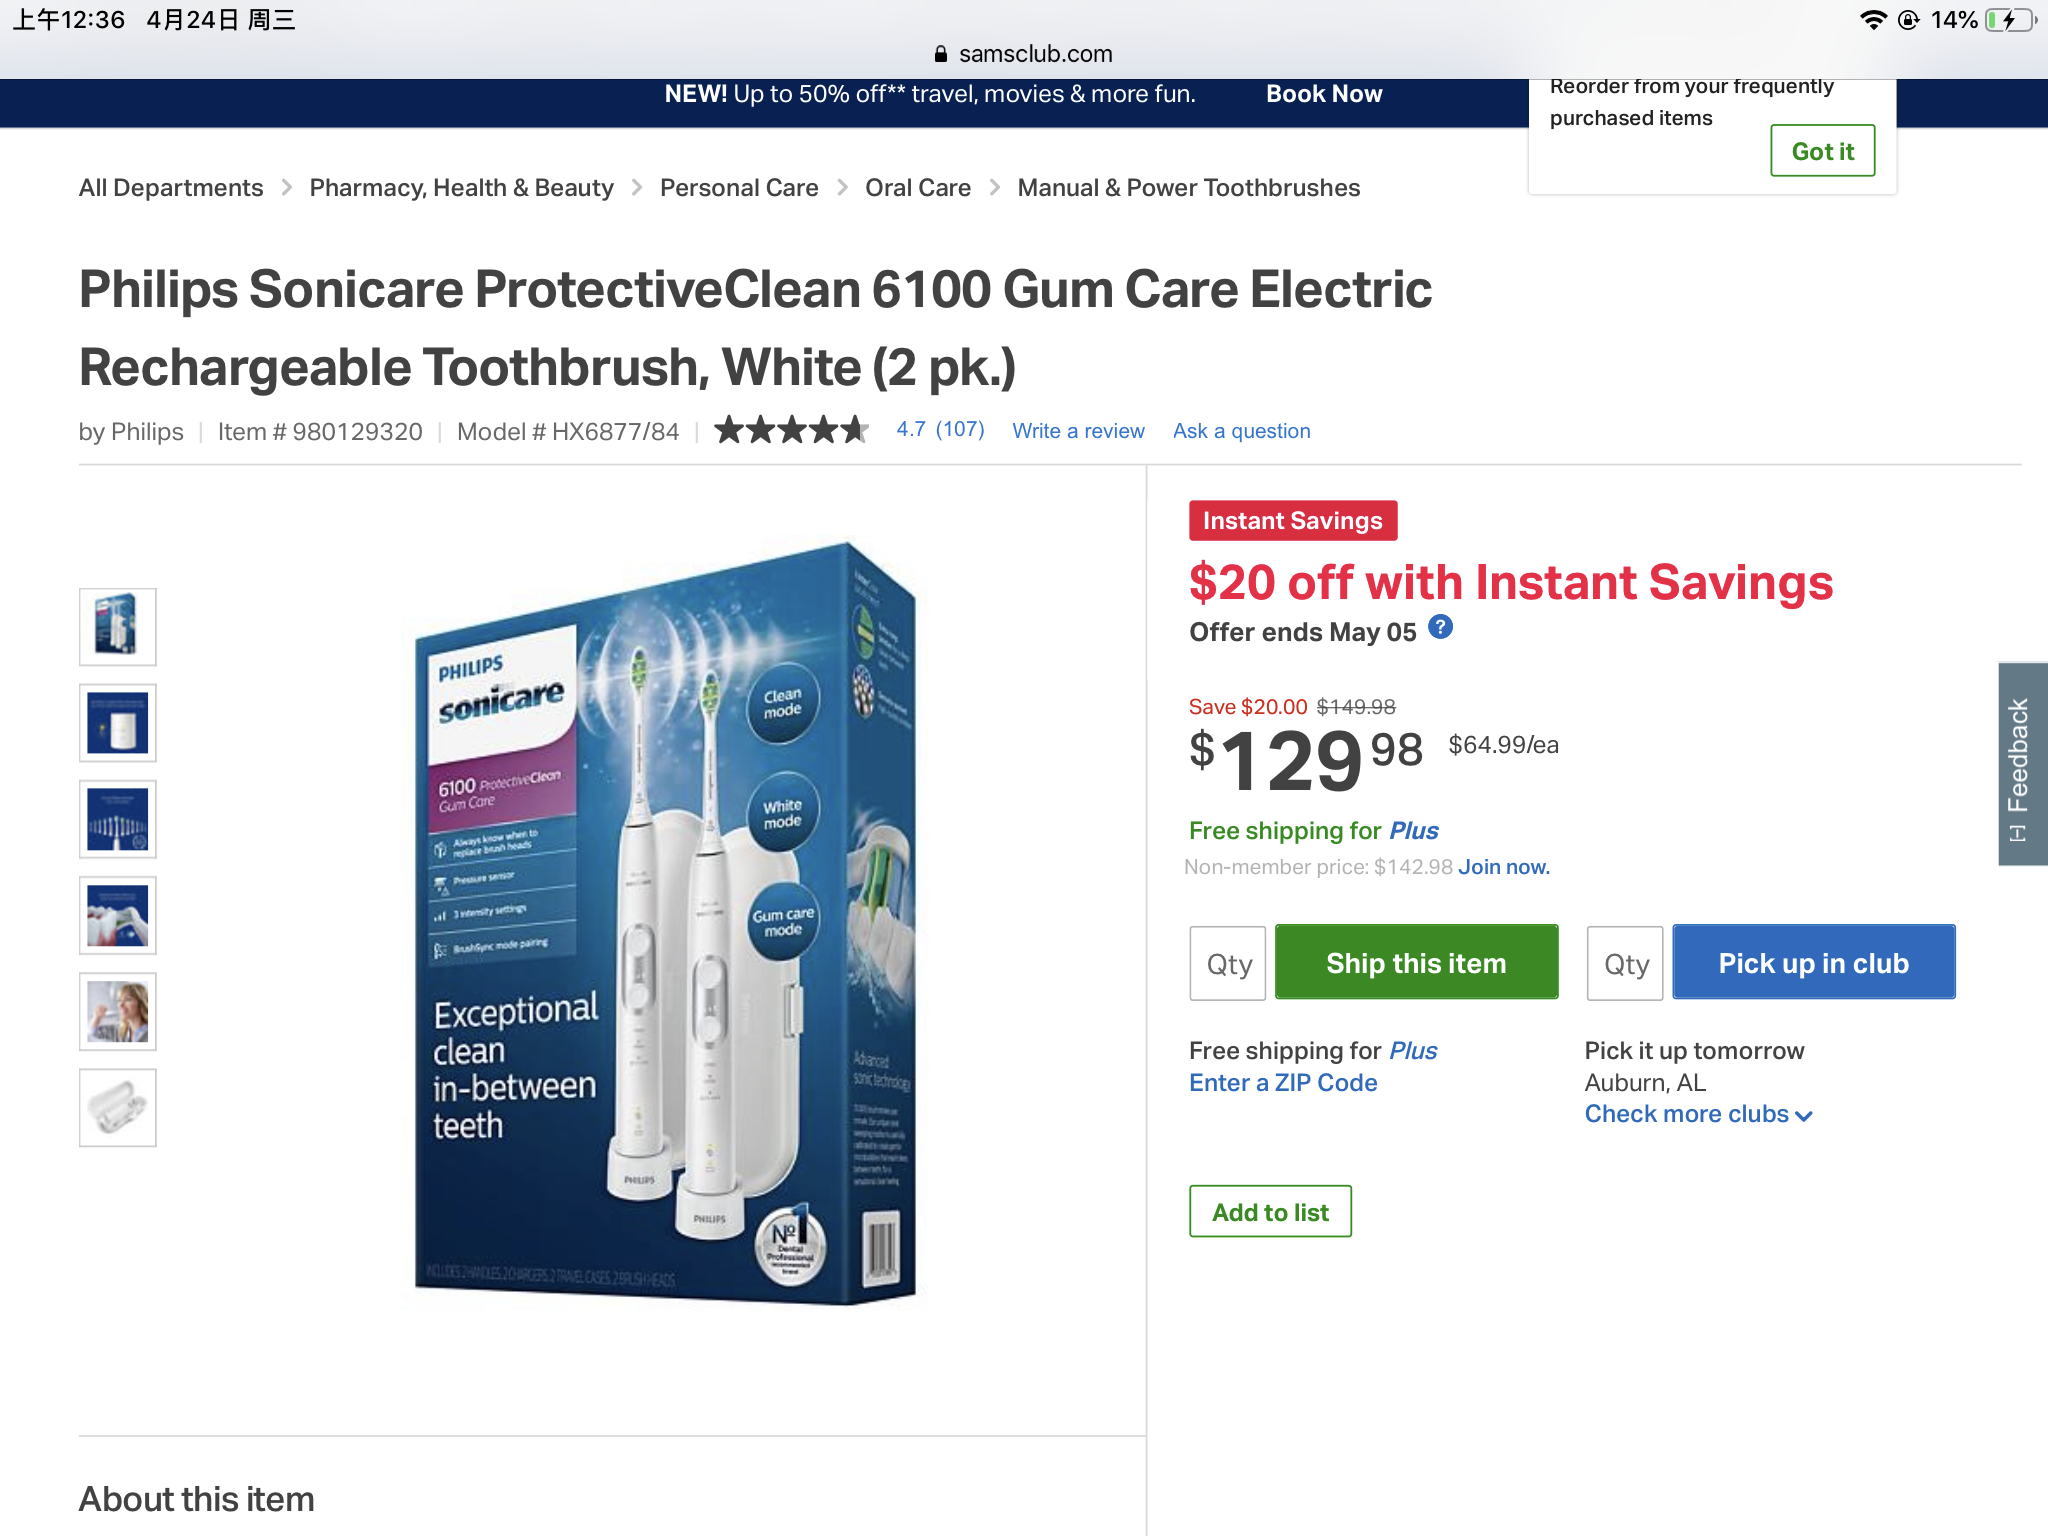 Philips Sonicare ProtectiveClean 6100 2 packs 电动牙刷 2只装